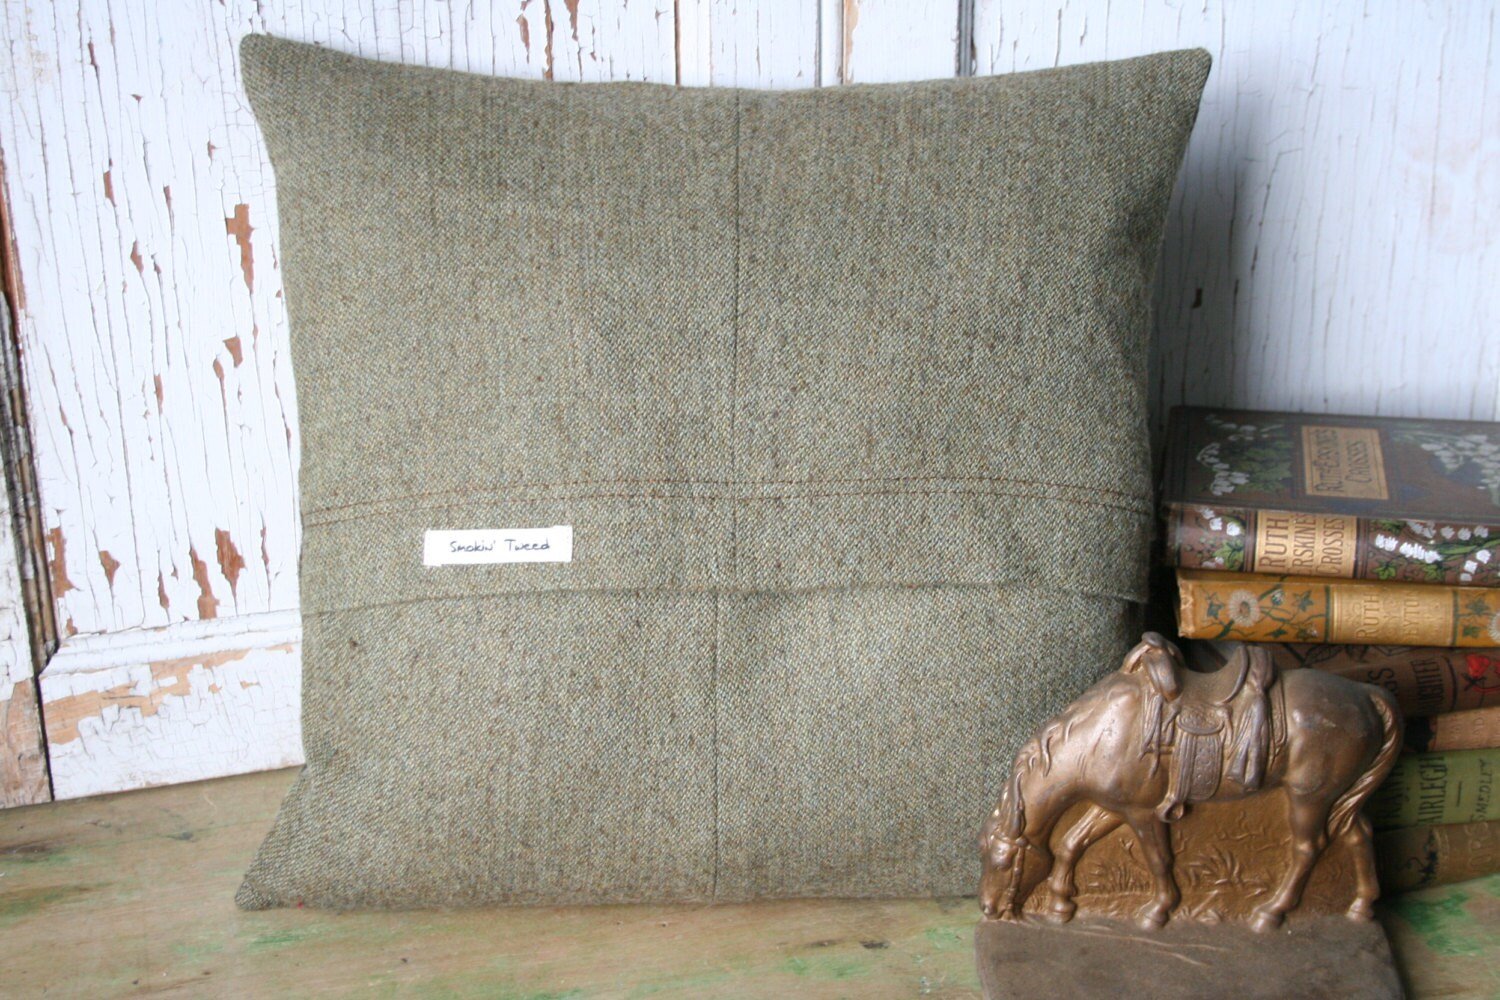 Recycled Wool Tweed PILLOW COVER - Green, Eco-Friendly Decor, Handmade